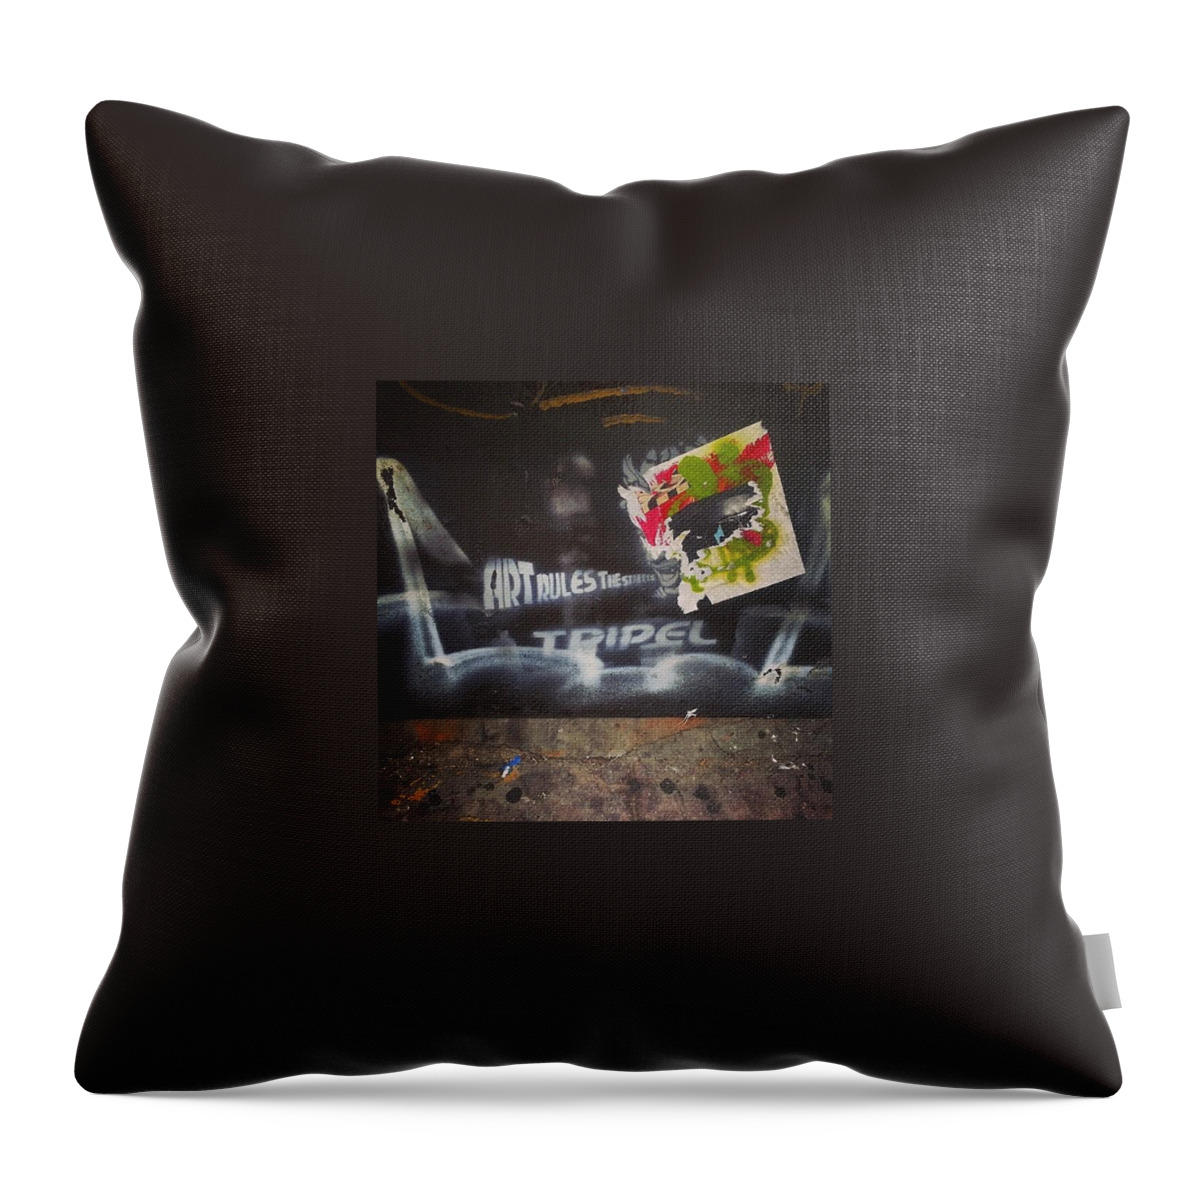 Igersnyc Throw Pillow featuring the photograph Art Rules The Streets by Charlie Cliques